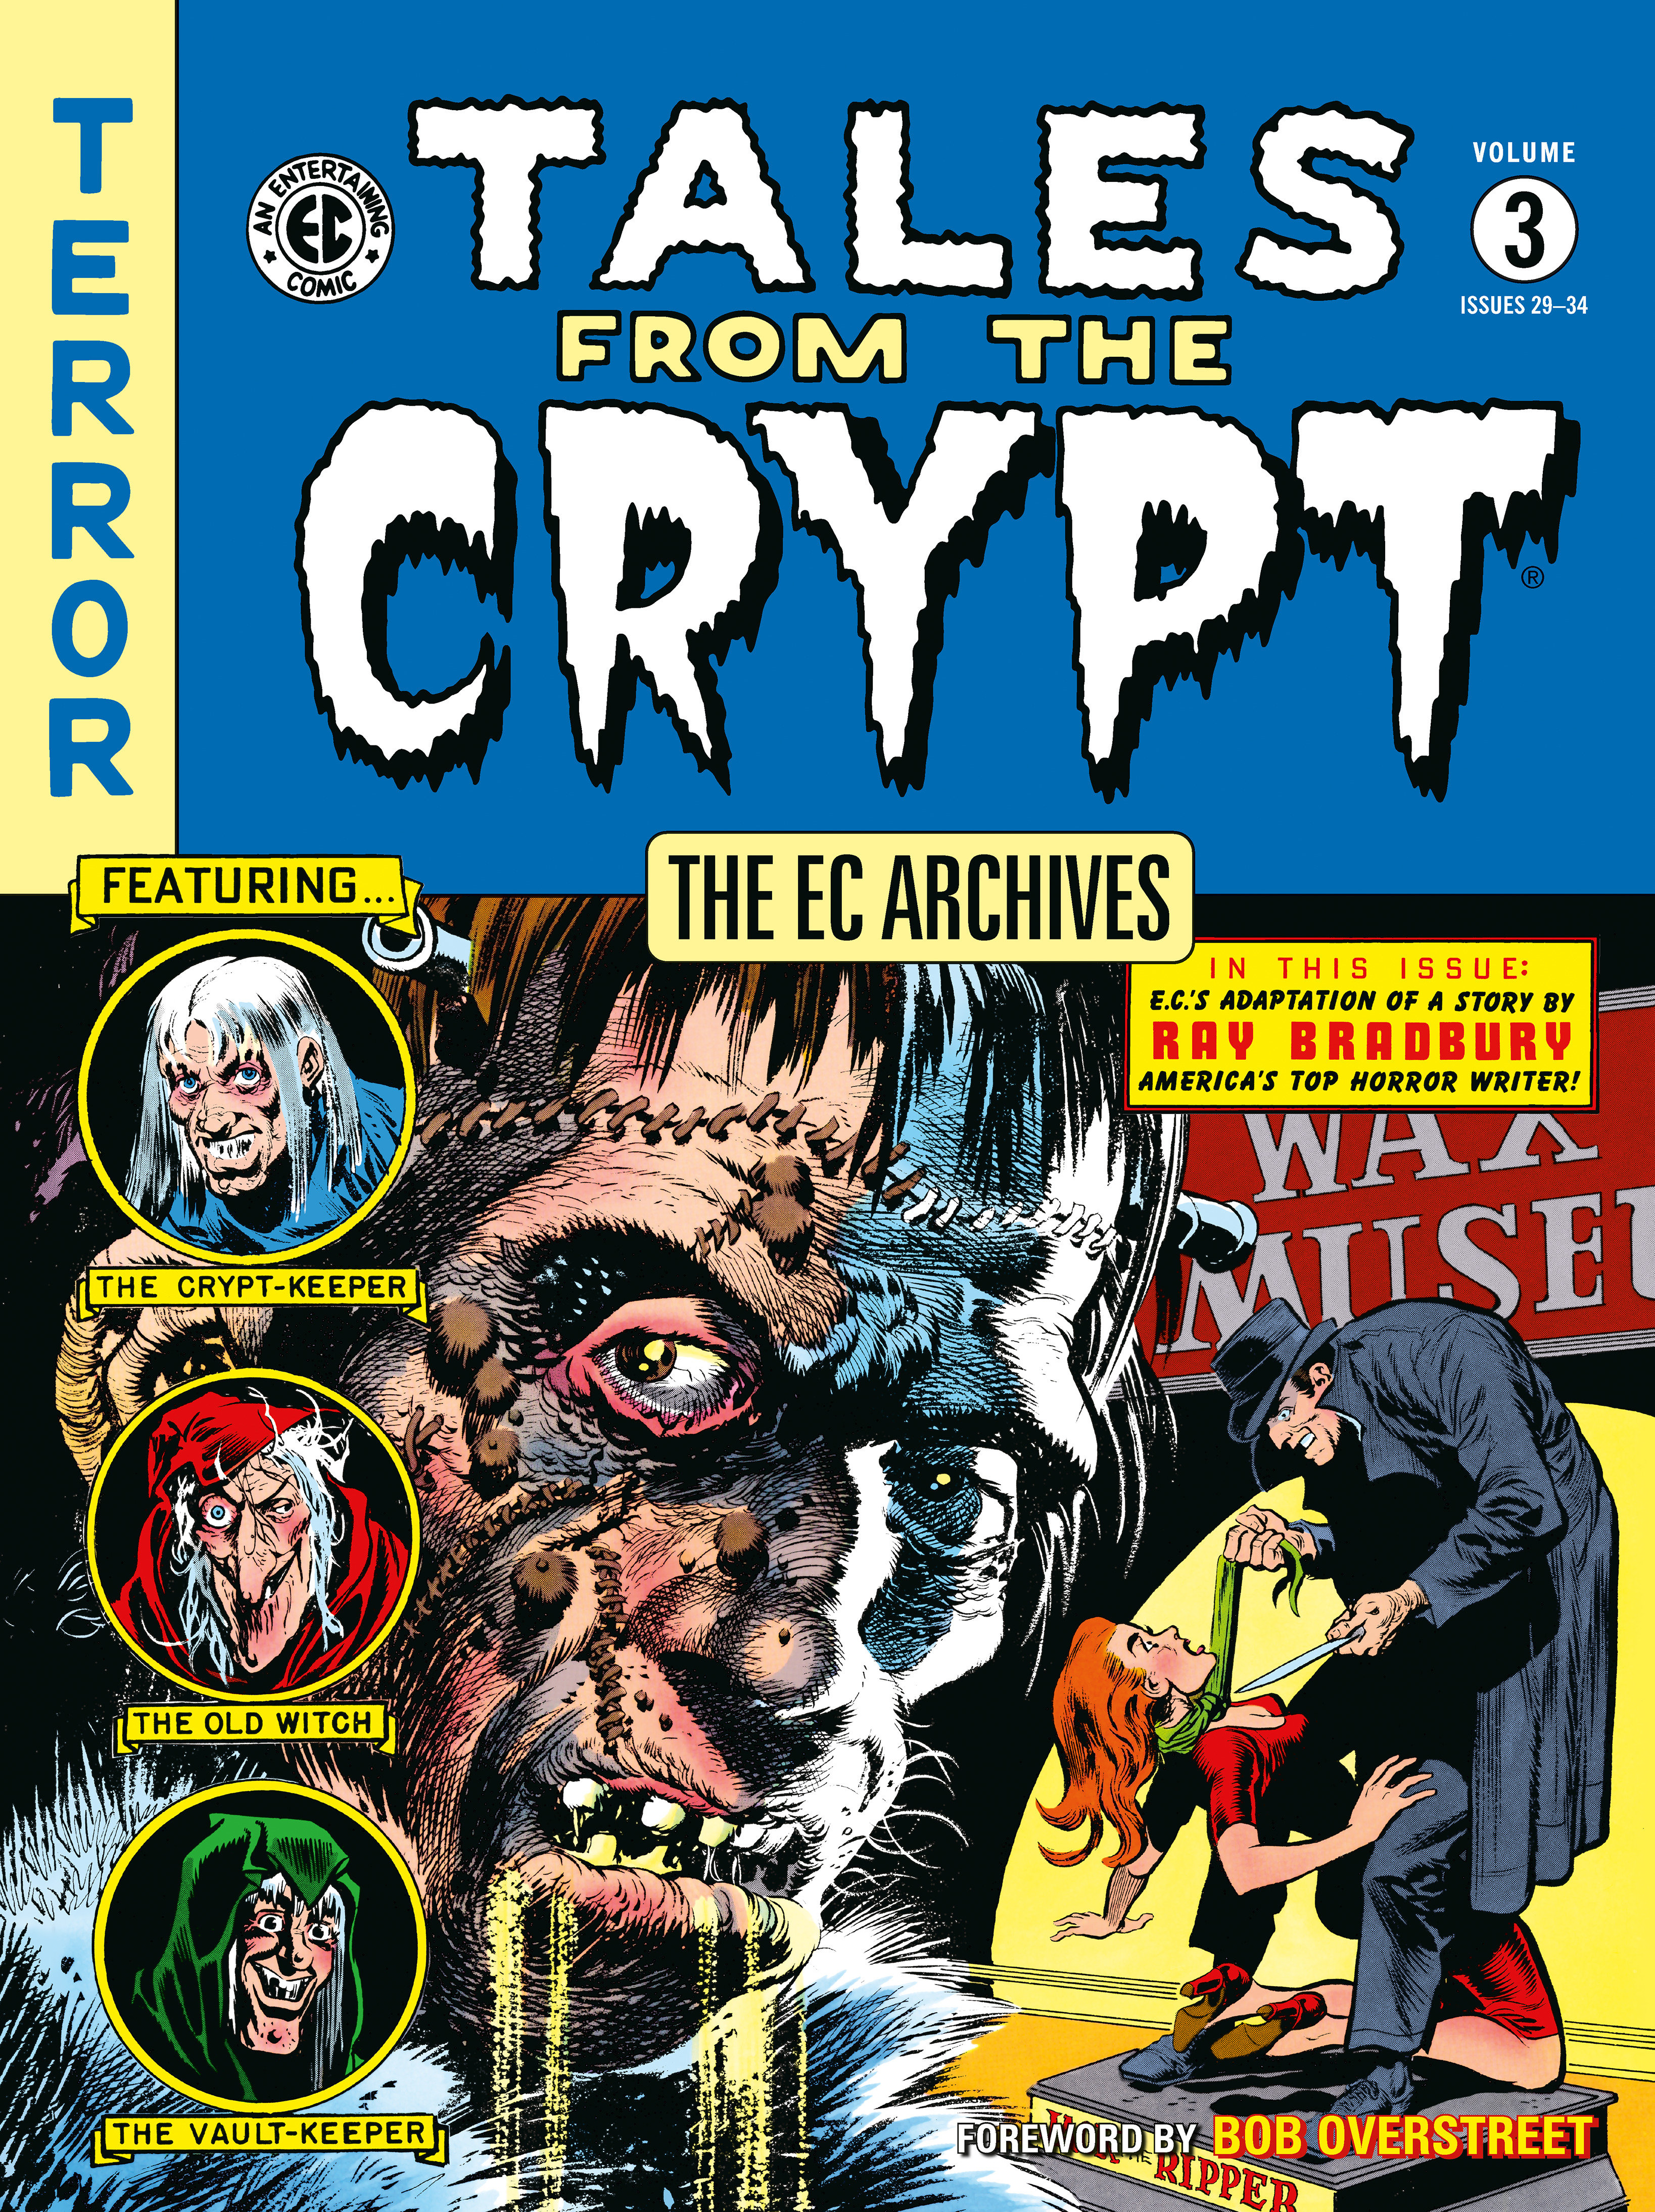 EC Archives Tales from Crypt Graphic Novel Volume 3